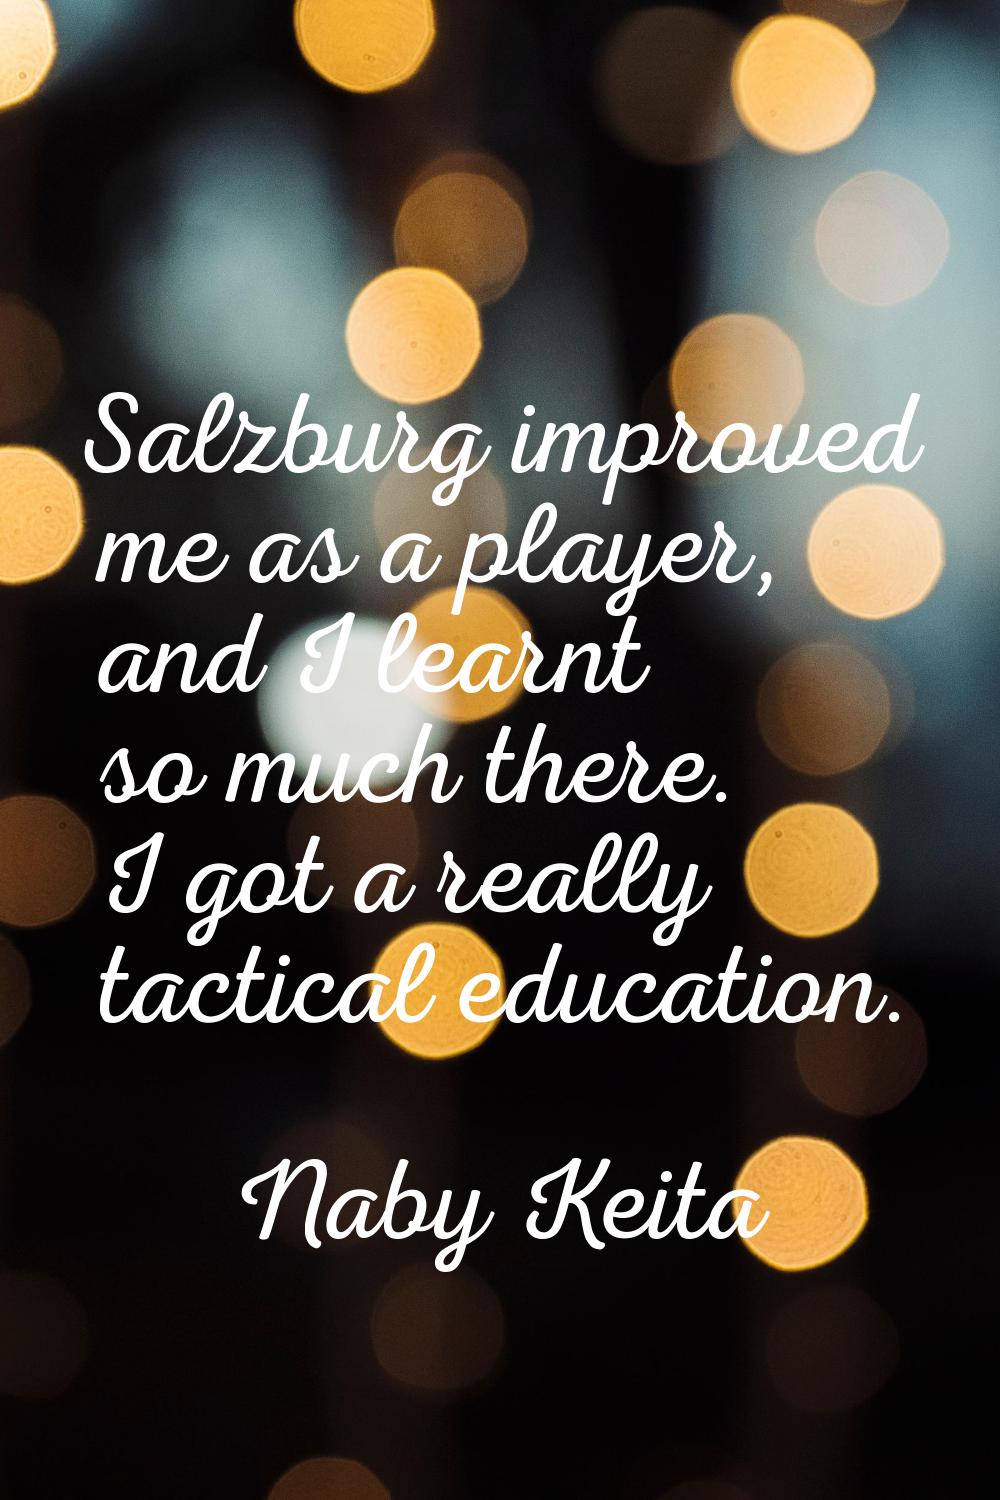 Salzburg improved me as a player, and I learnt so much there. I got a really tactical education.